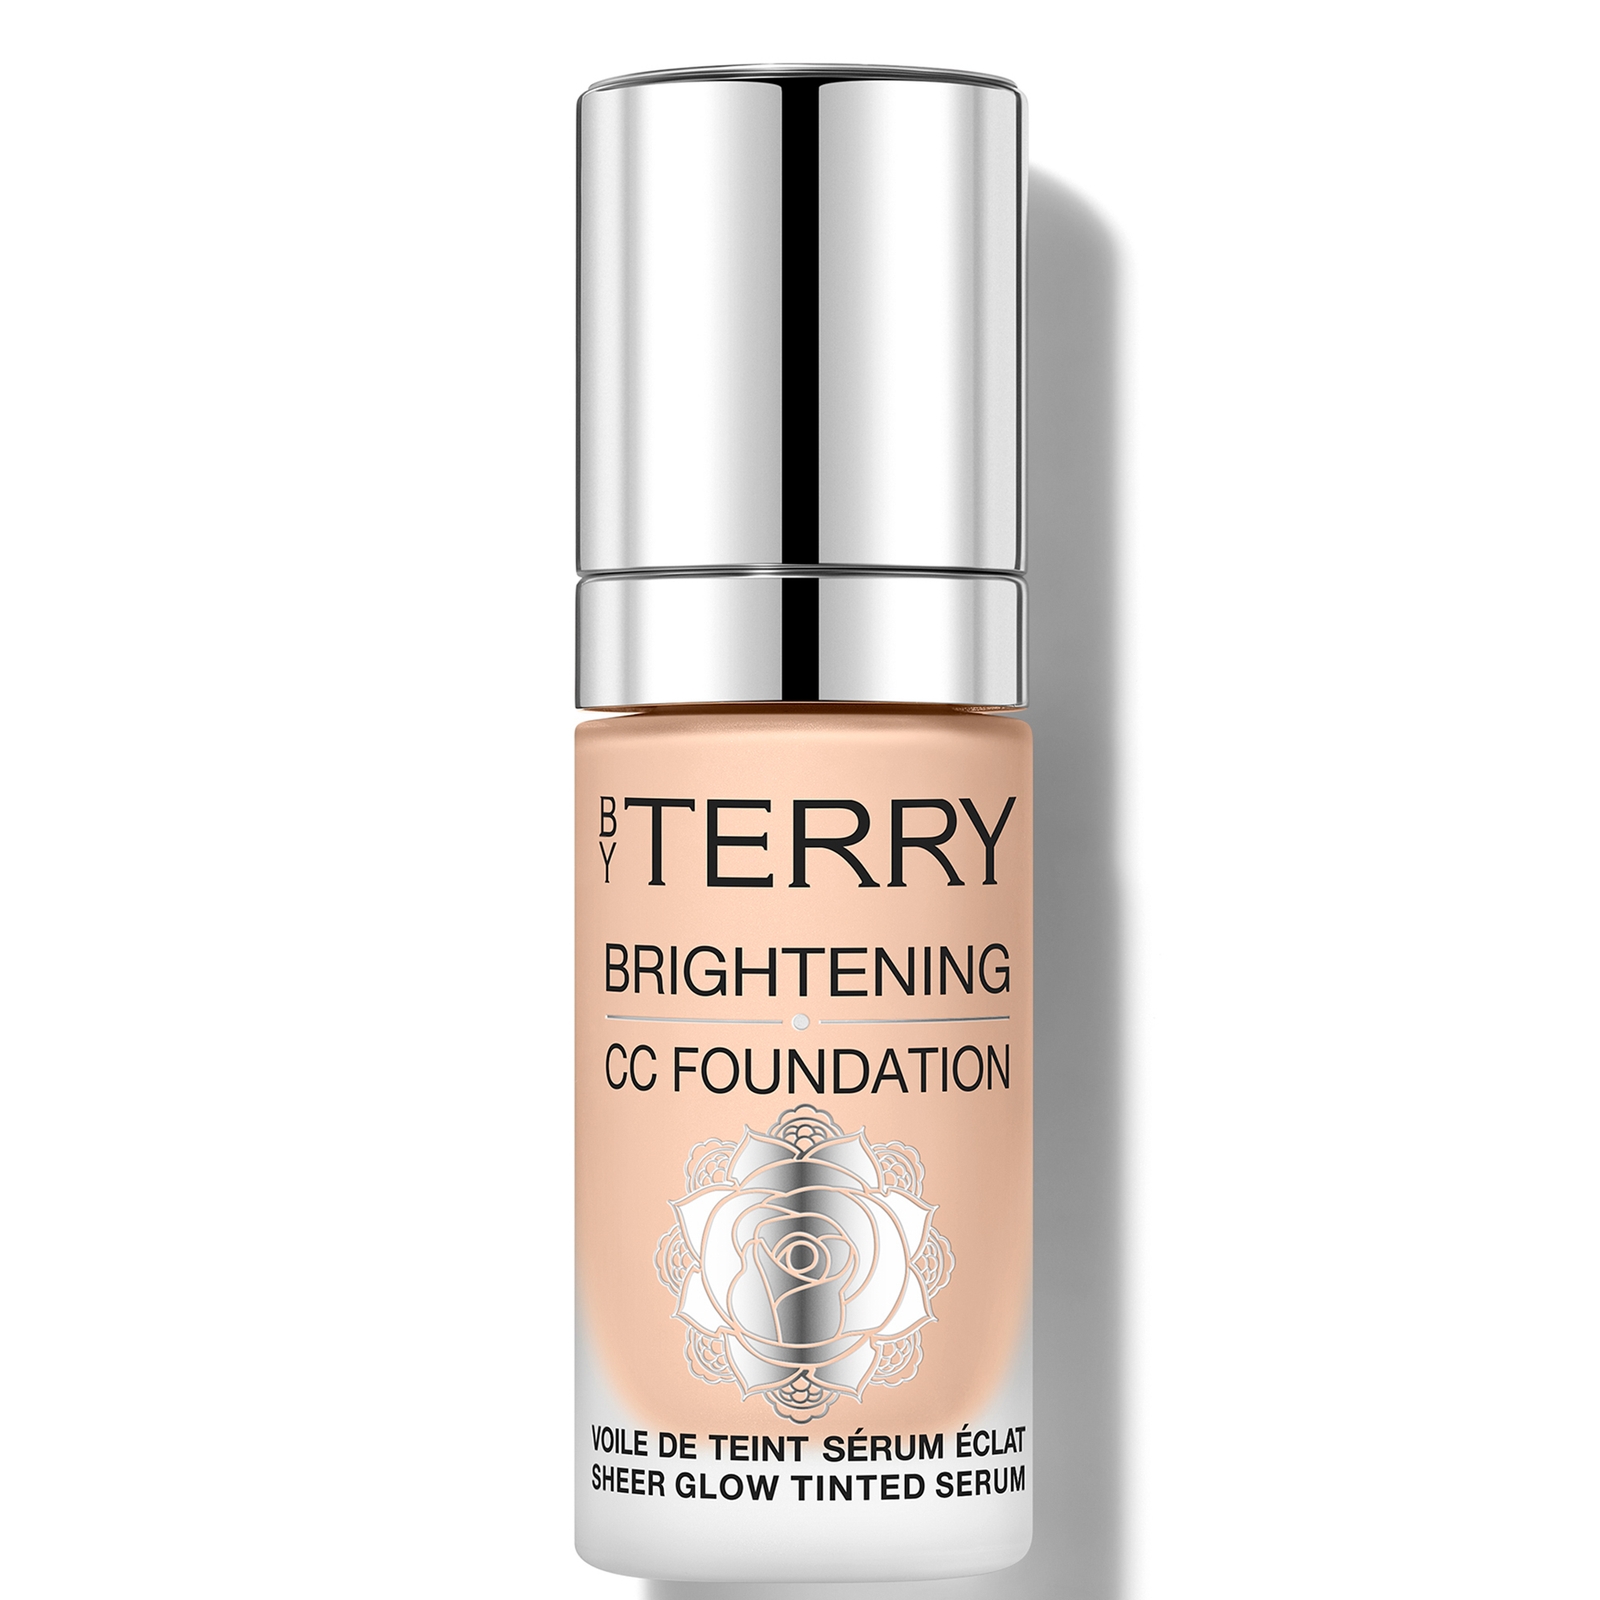 Image of By Terry Brightening CC Foundation 30ml (Various Shades) - 3C - MEDIUM LIGHT COOL